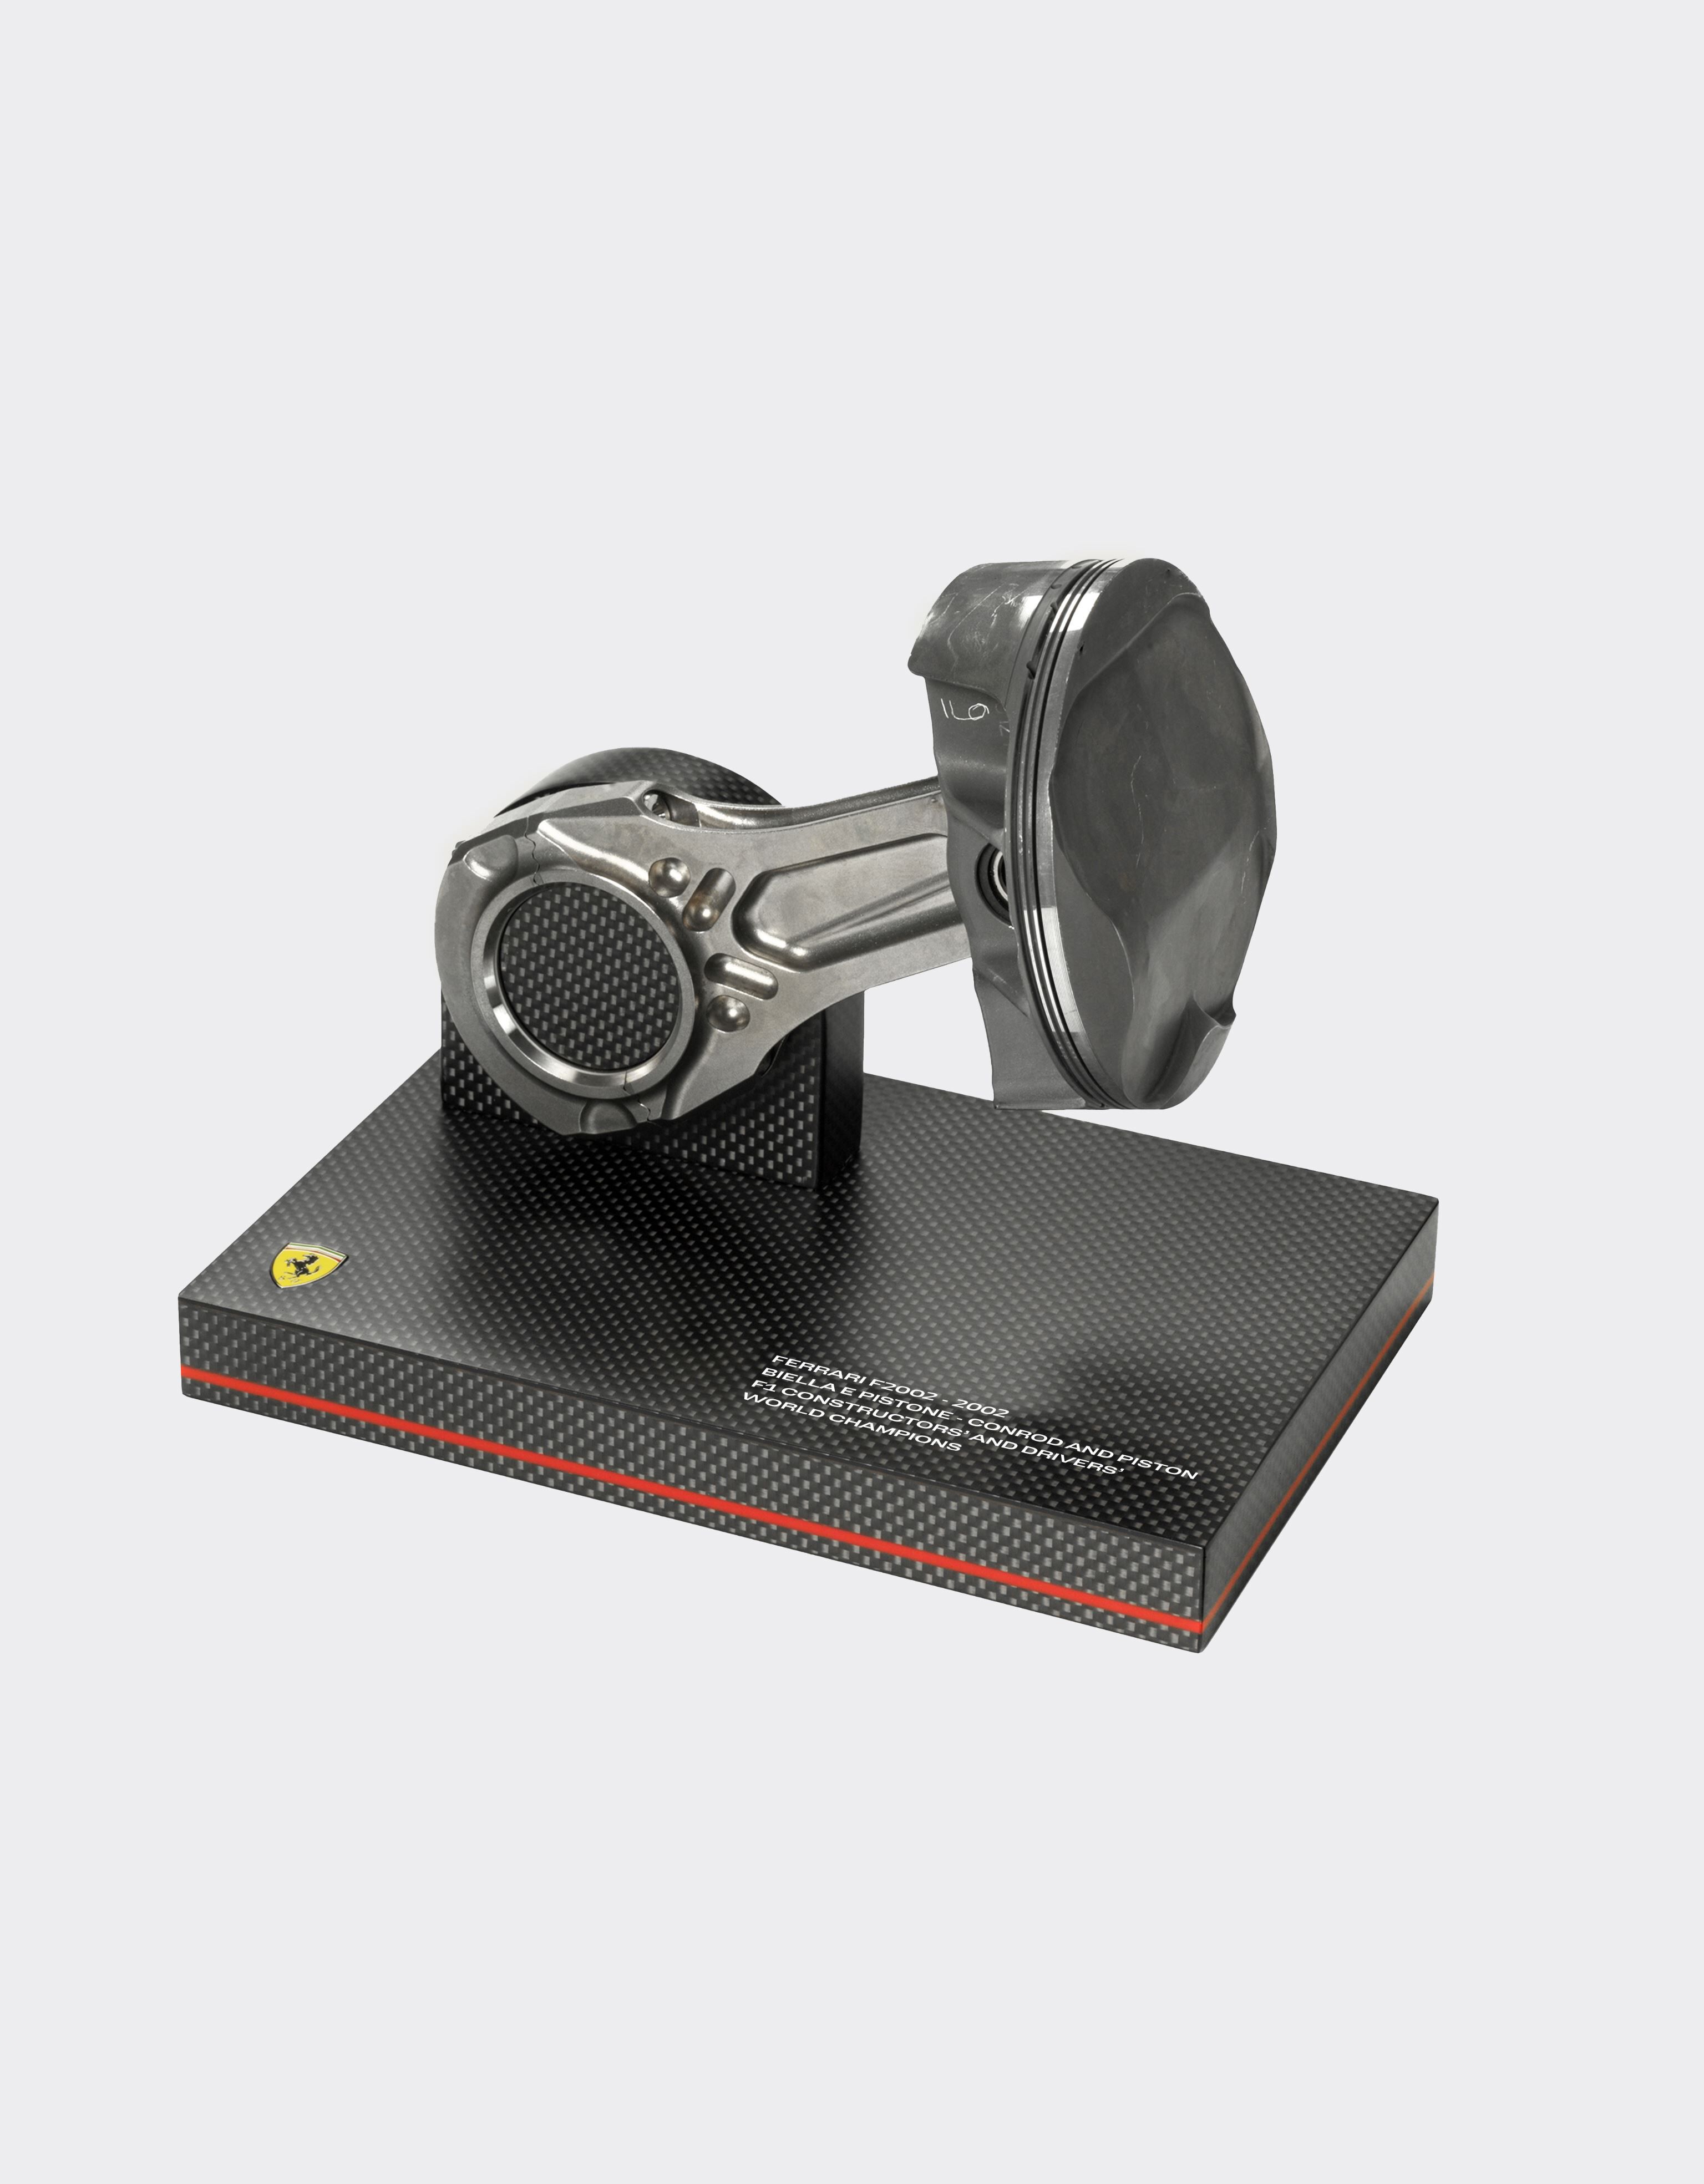 Ferrari Original connecting rod and piston set from the F2002, winner of the 2002 Constructors’ and Drivers’ Championships Silver 20056f